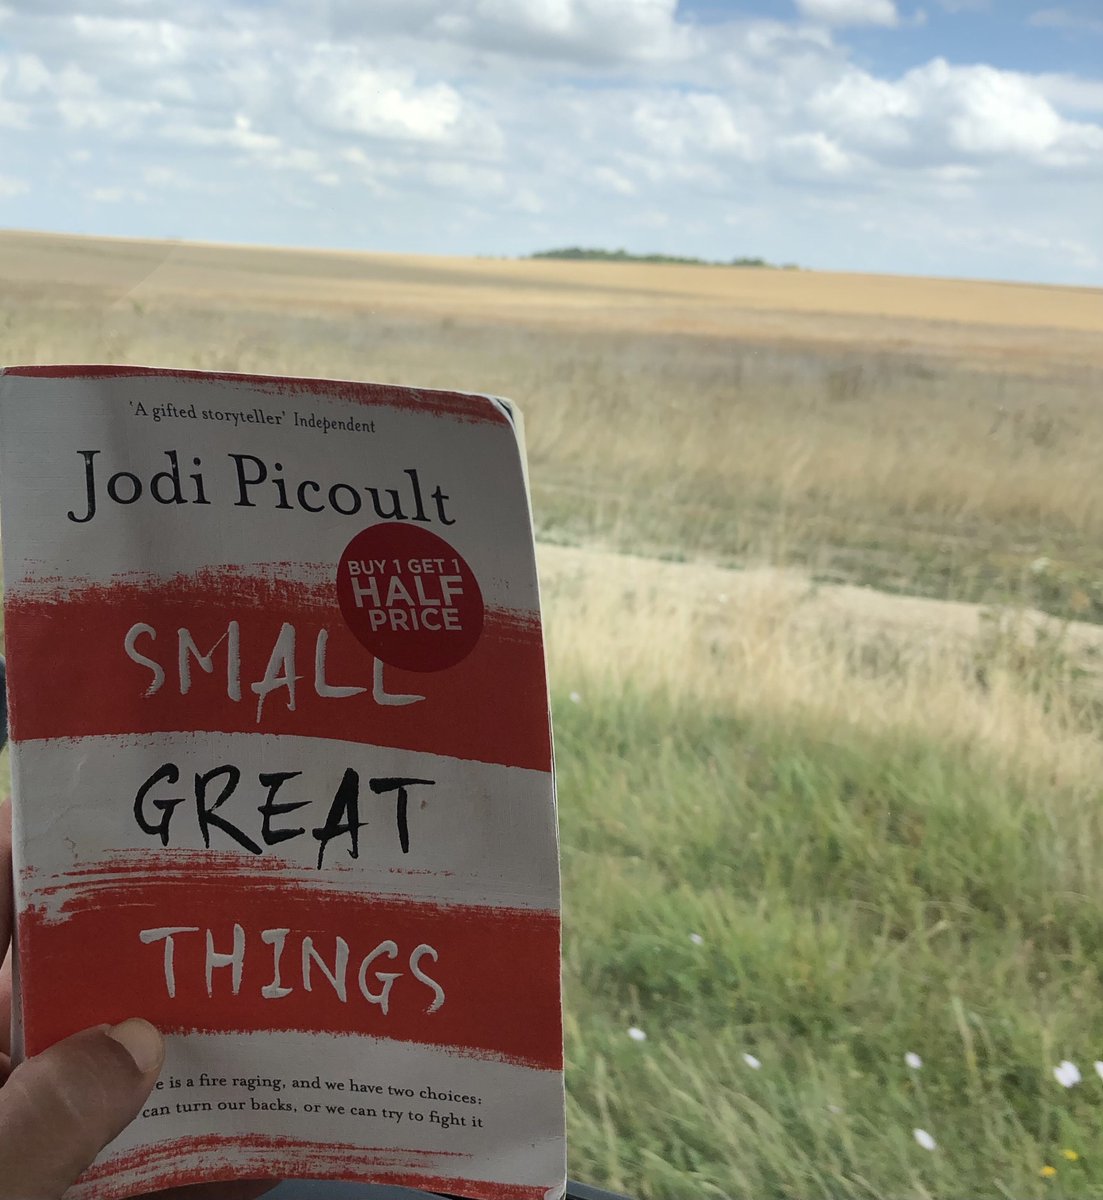 Our staff are loving @jodipicoult's book #SmallGreatThings and our #BlackHistoryMonth #BigRead book club sessions. Still reading the book? Haven't started reading it? Worry not, join us today and next Thursday at 12.30pm for our book discussion sessions @SWLSTG @ESwlstg